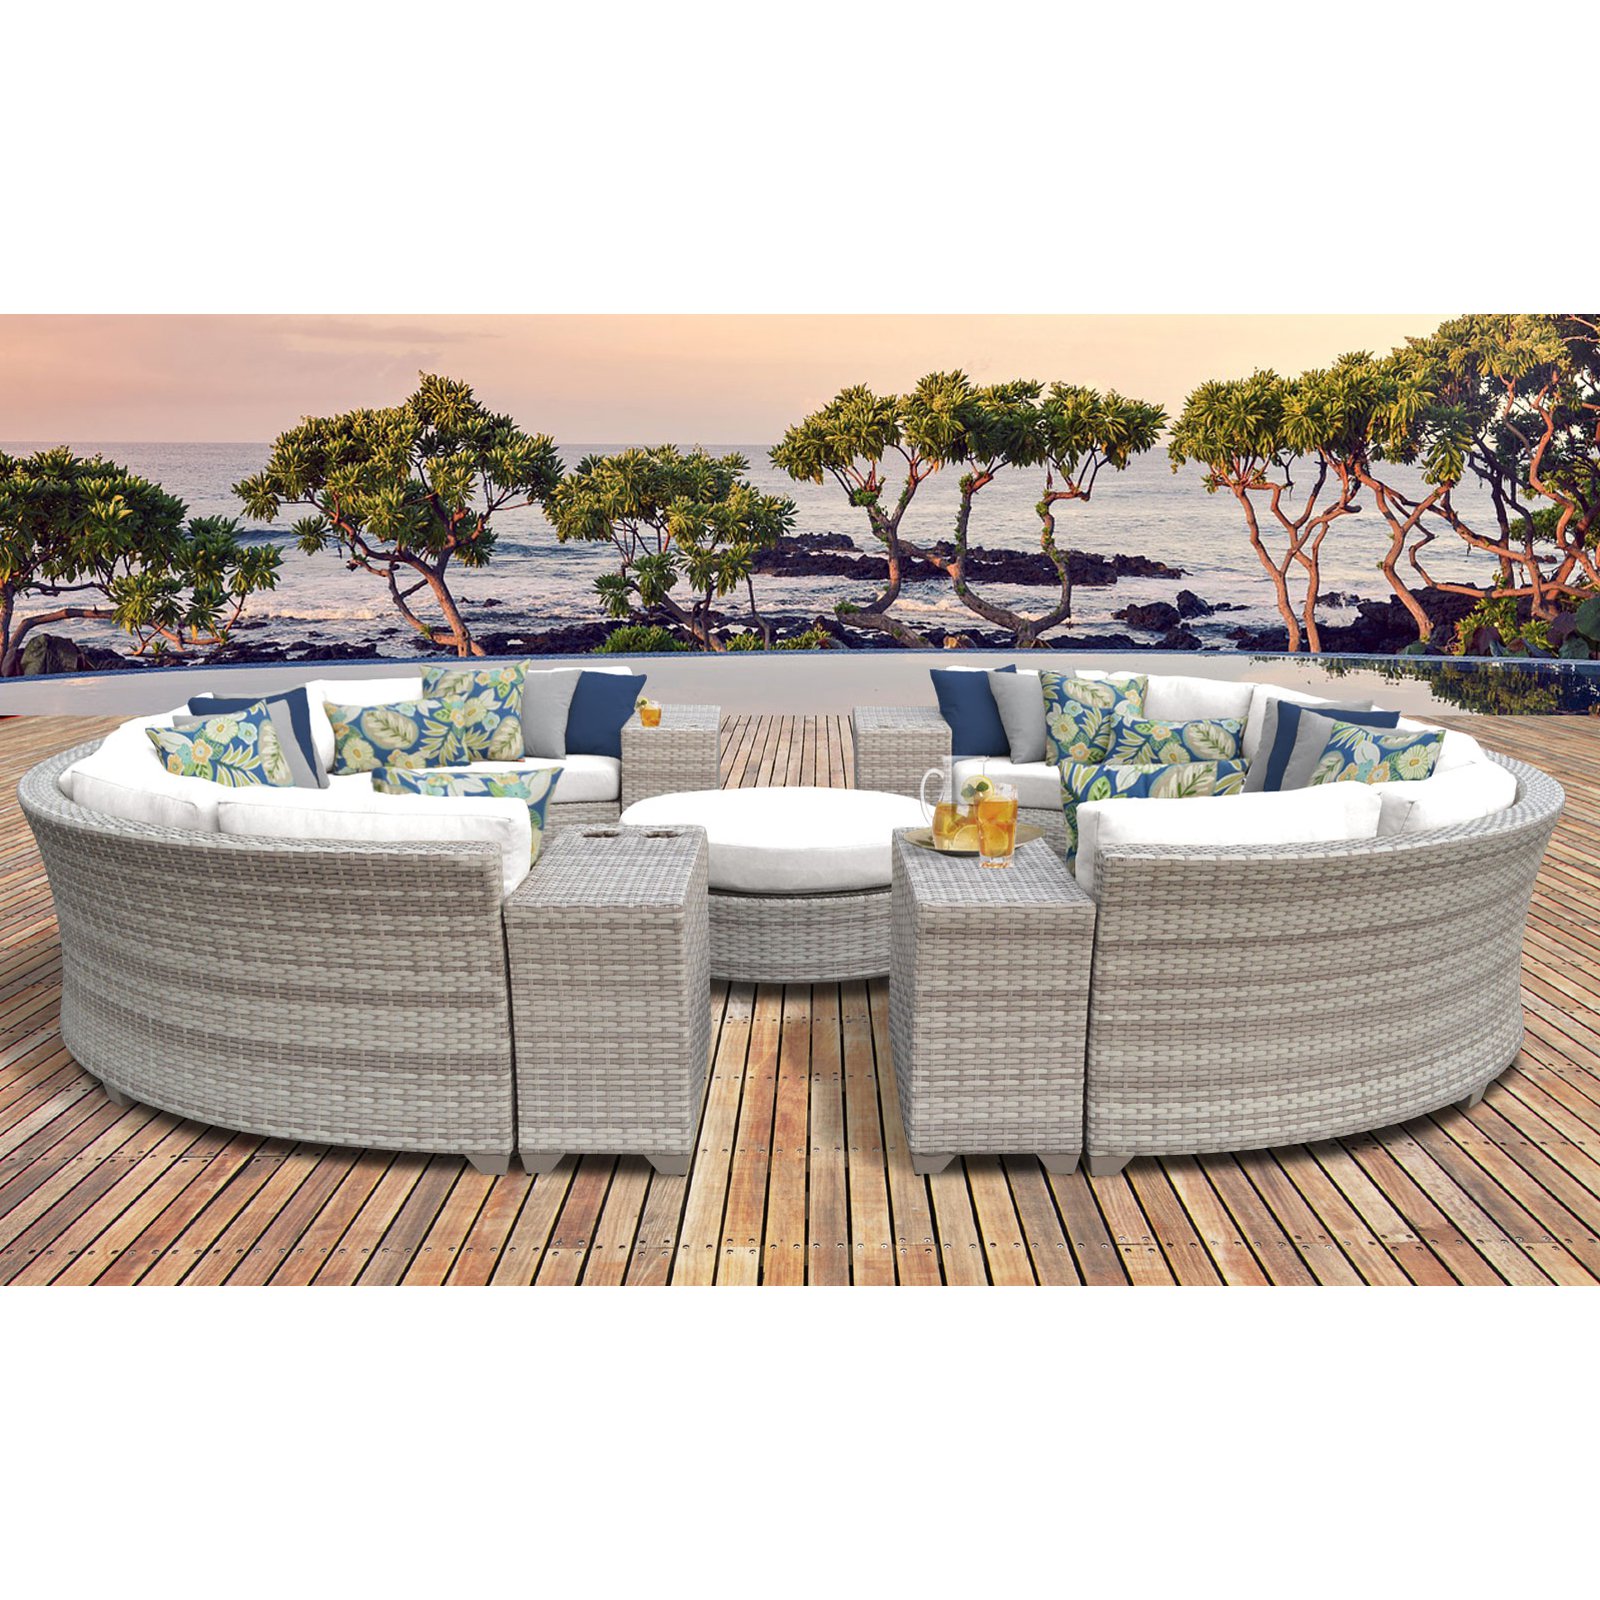 TK Classics Fairmont All-Weather Wicker 11 Piece Round Sectional Patio Conversation Set - image 1 of 2